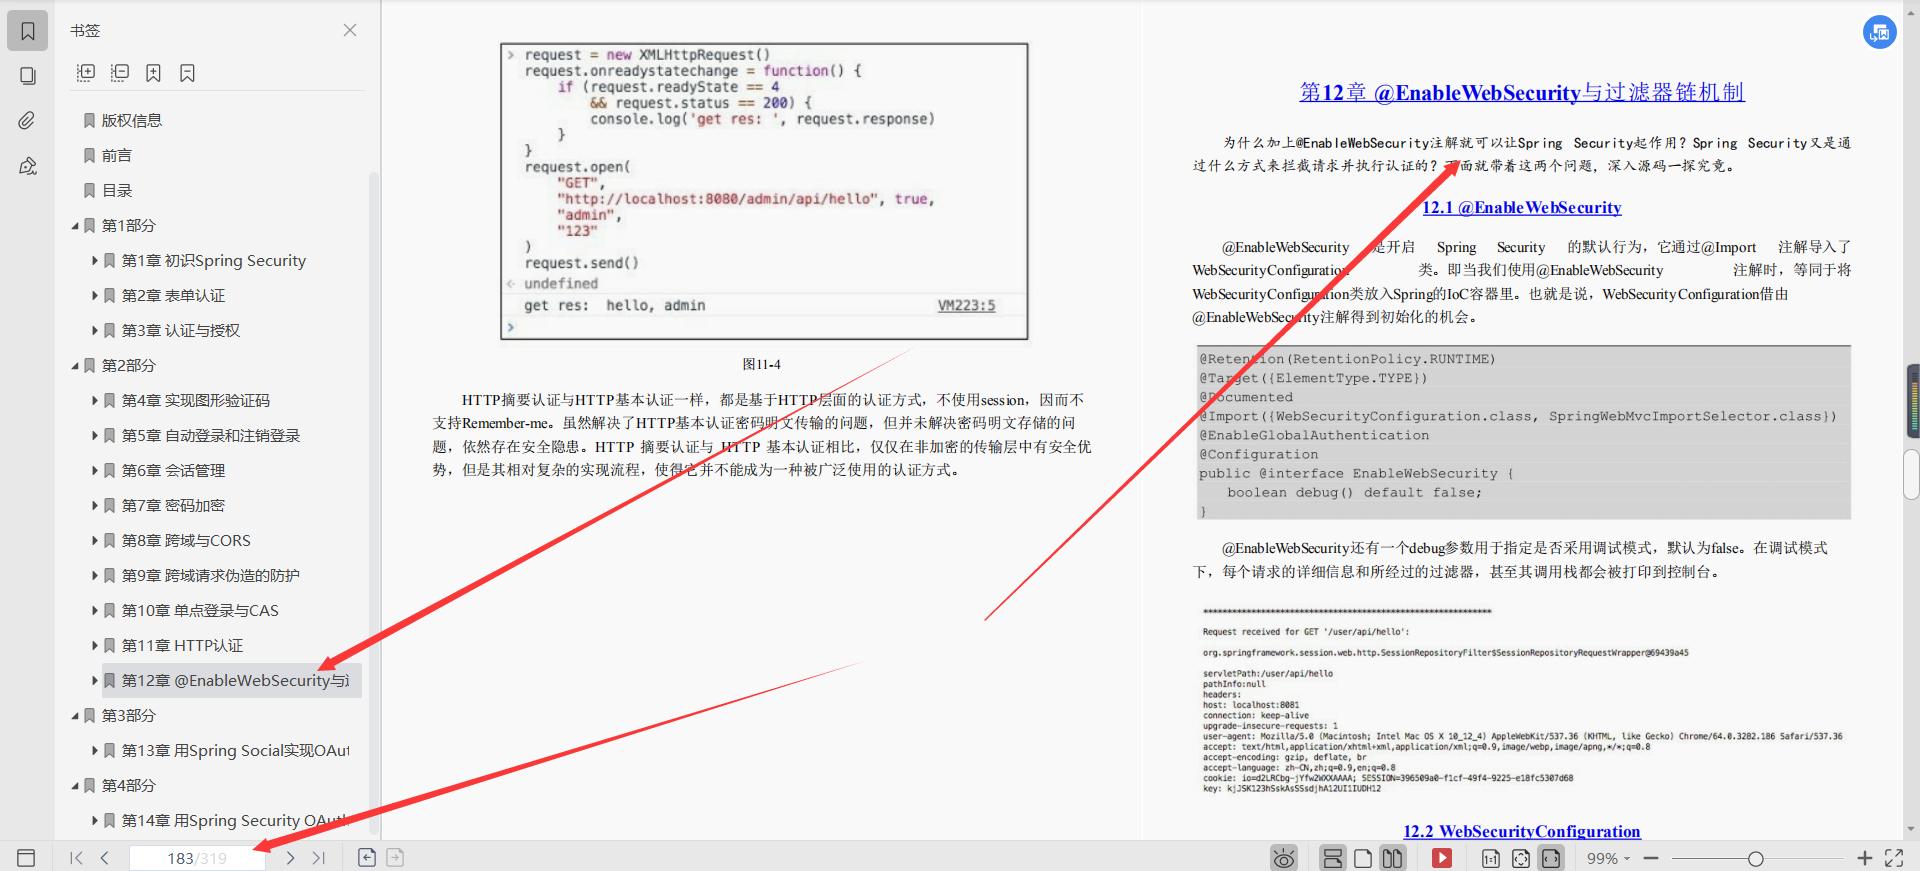 Alibaba senior architect compiled and shared SpringSecurity actual combat documents